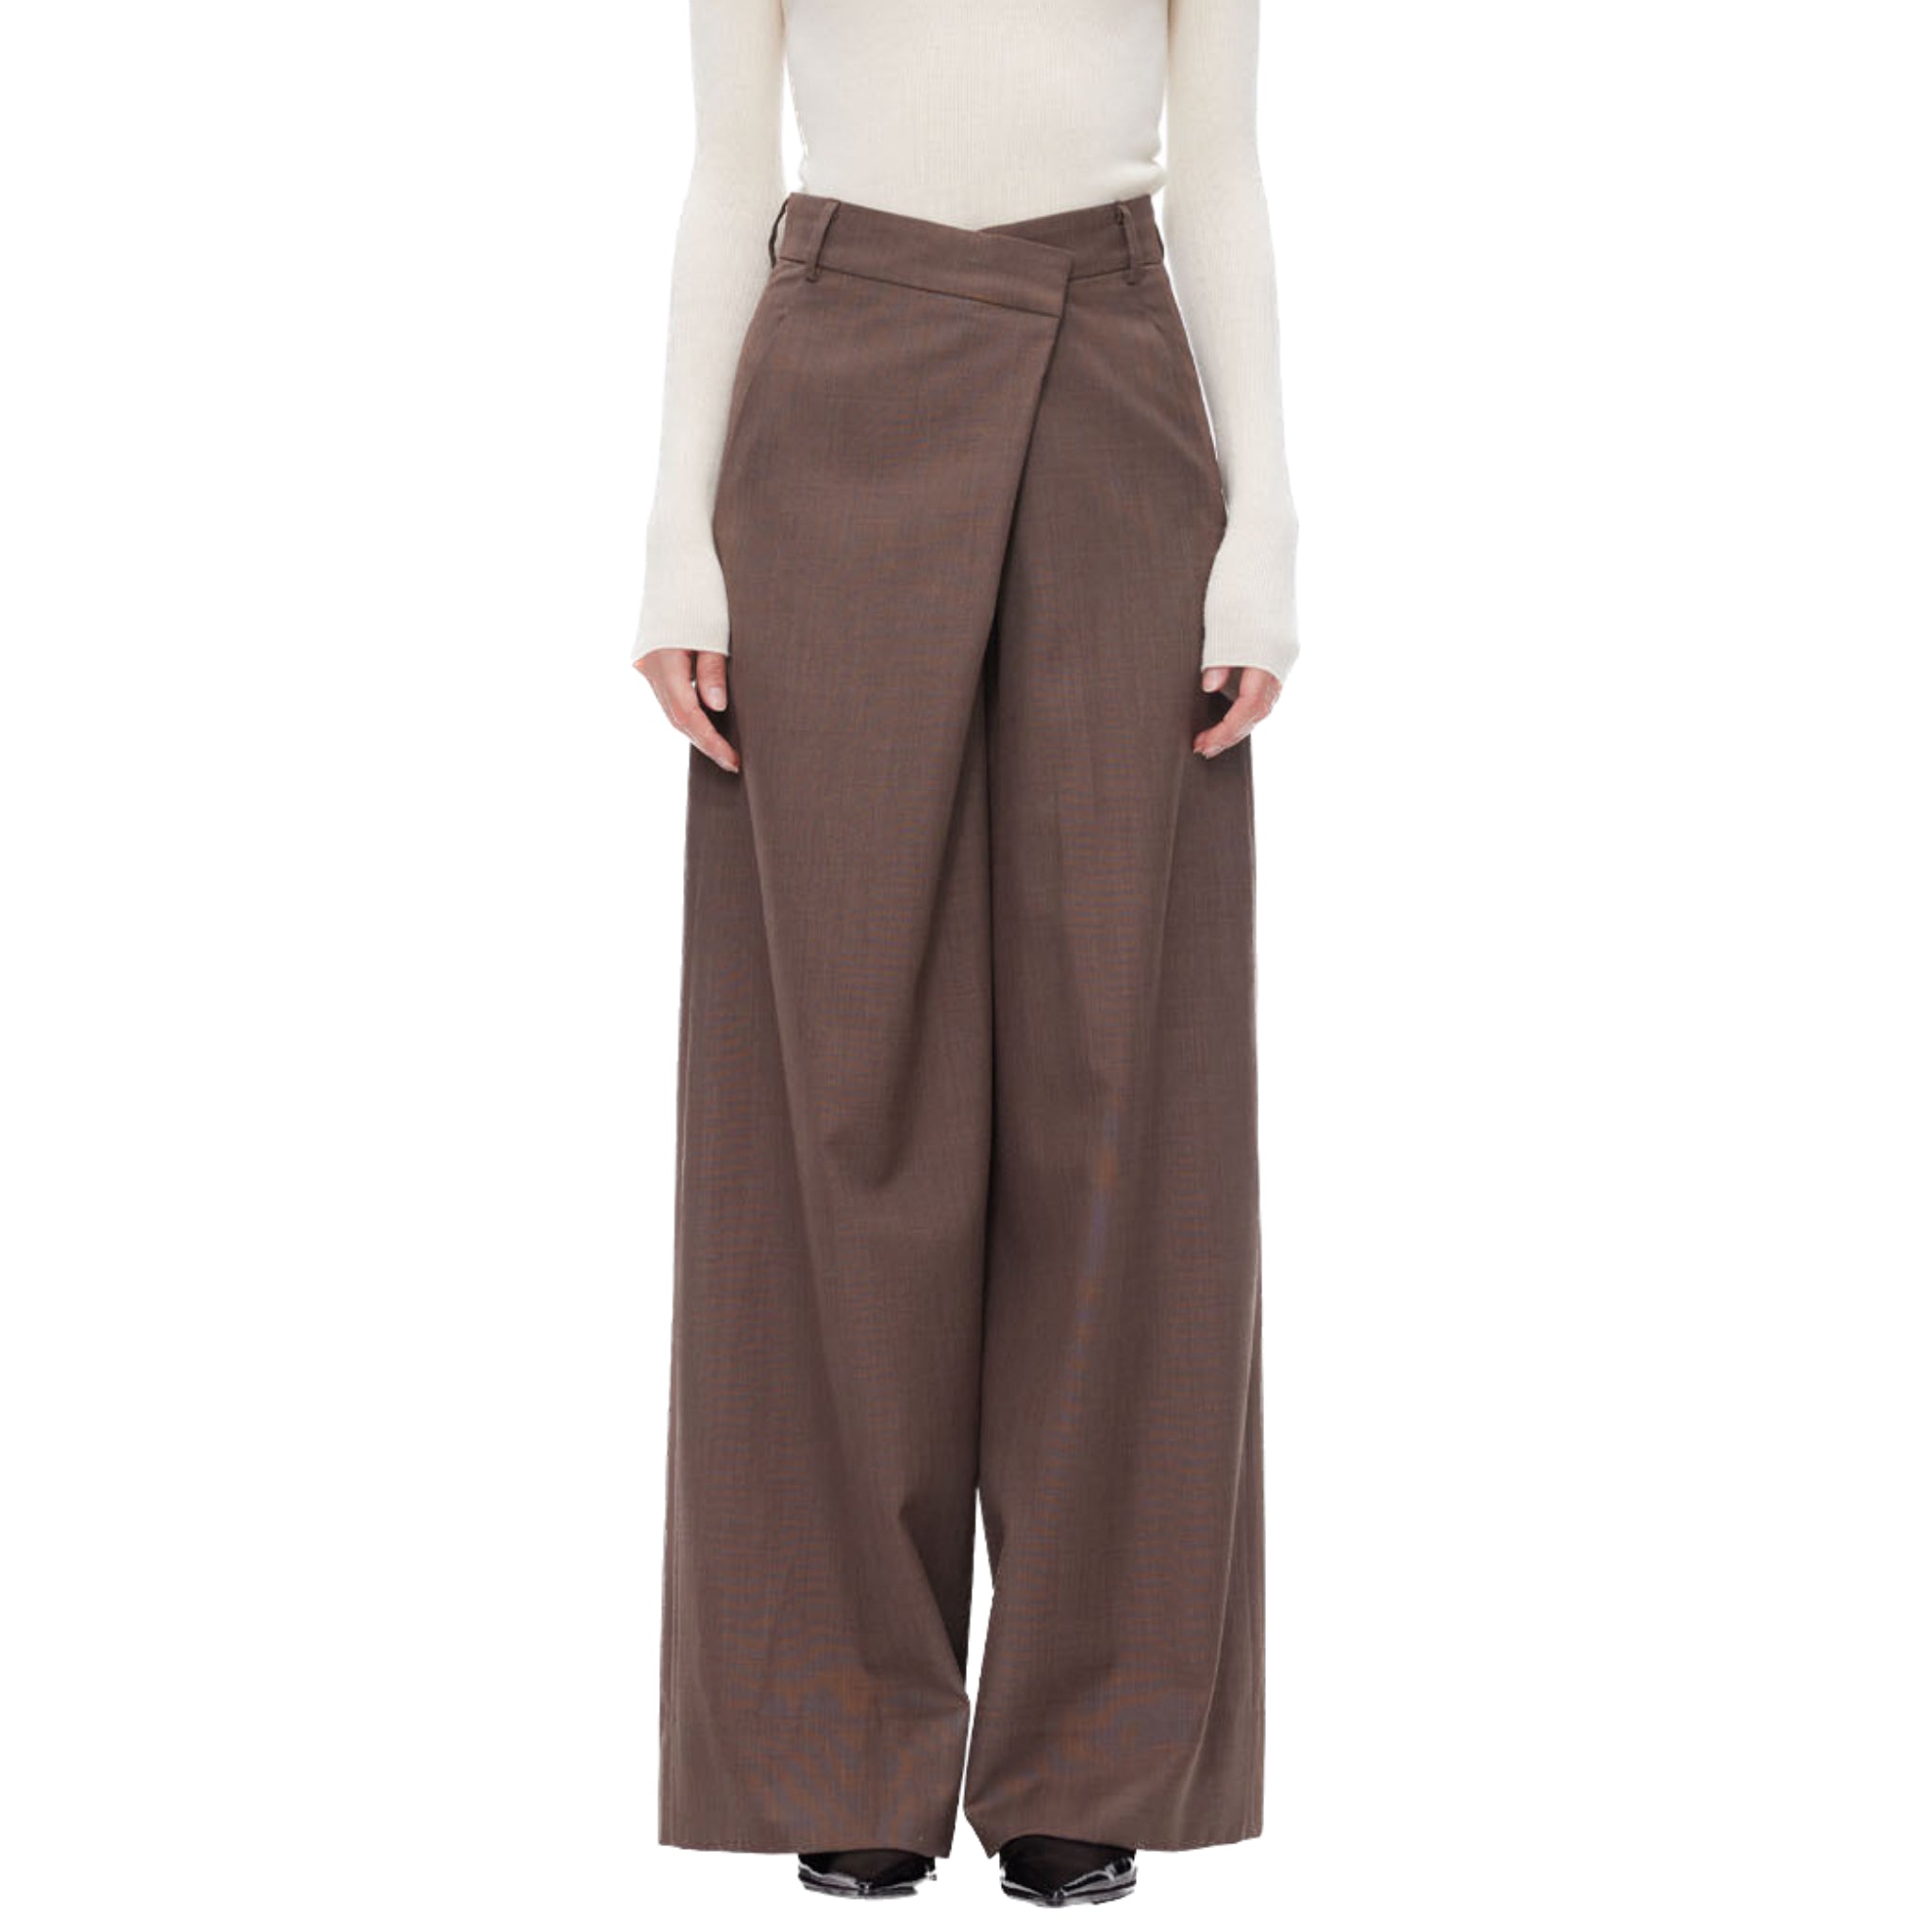 ANN ANDELMAN Brown Folded Waist Design Draped Suit Trousers | MADA IN CHINA